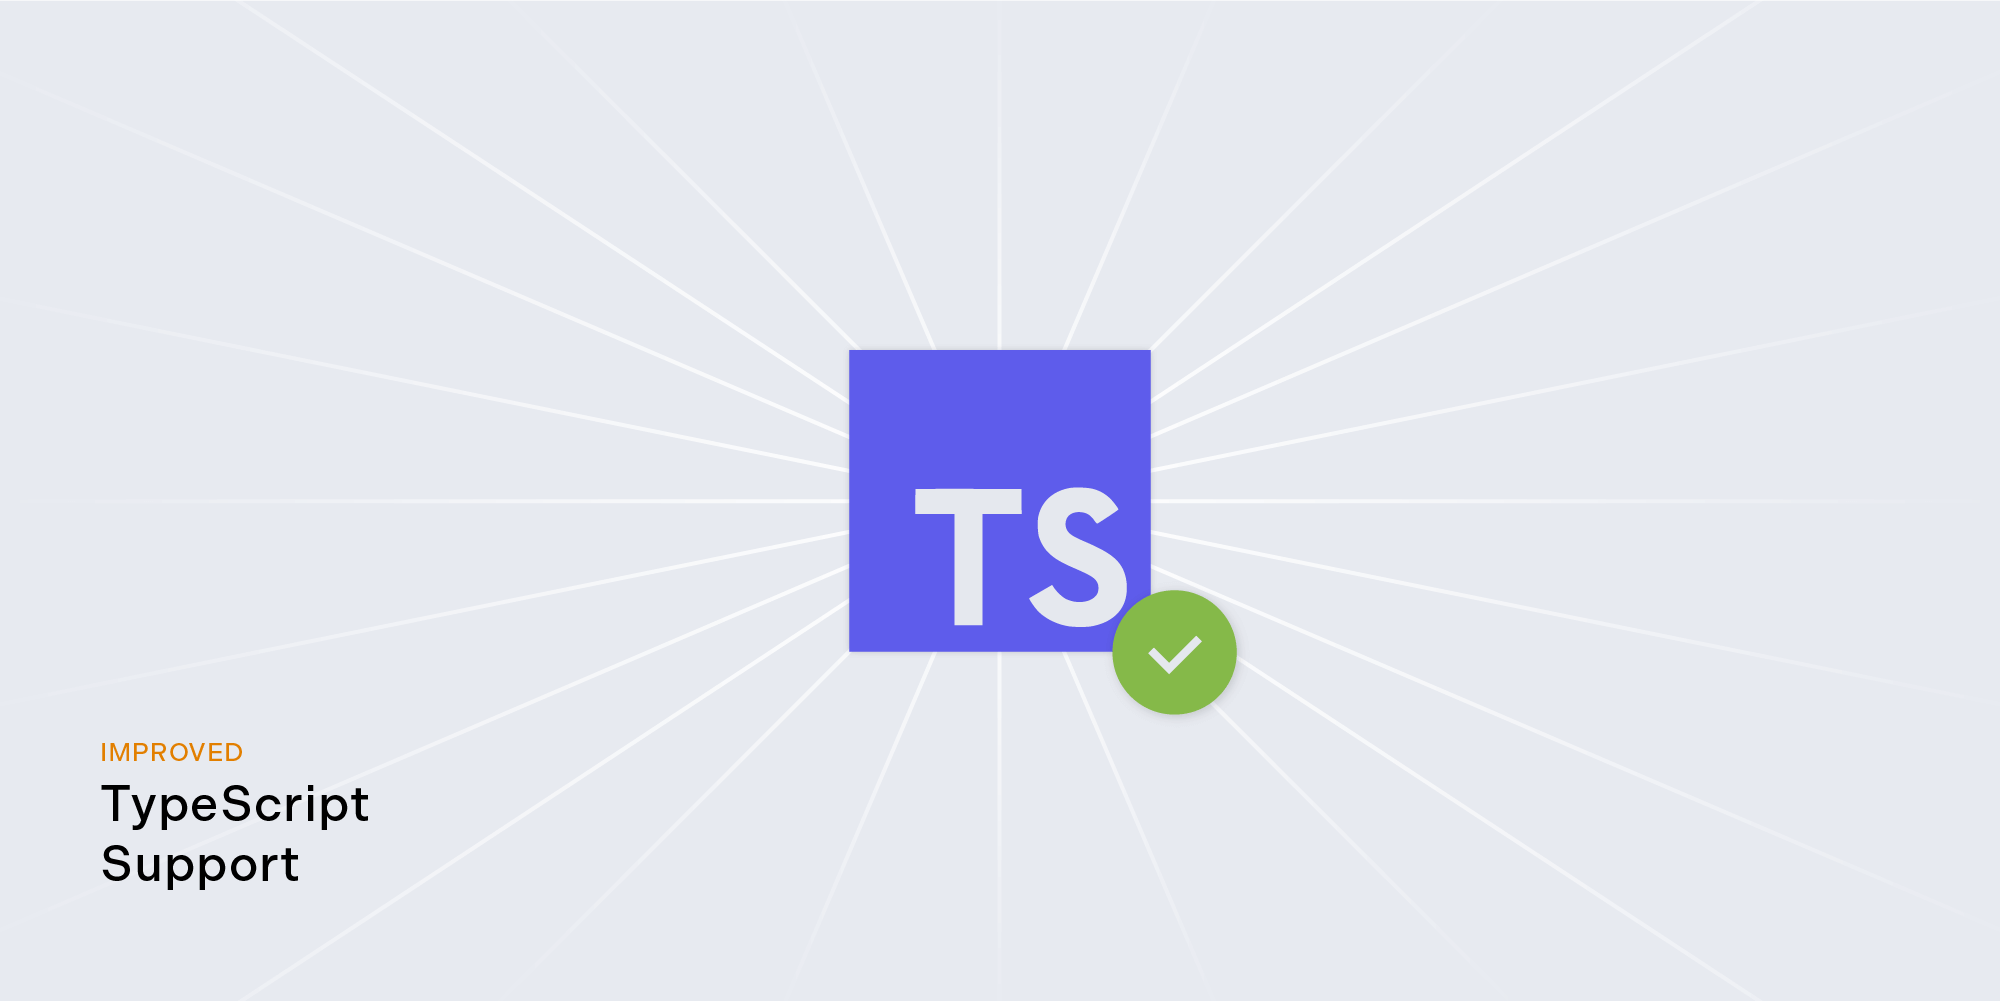 Improved TypeScript support